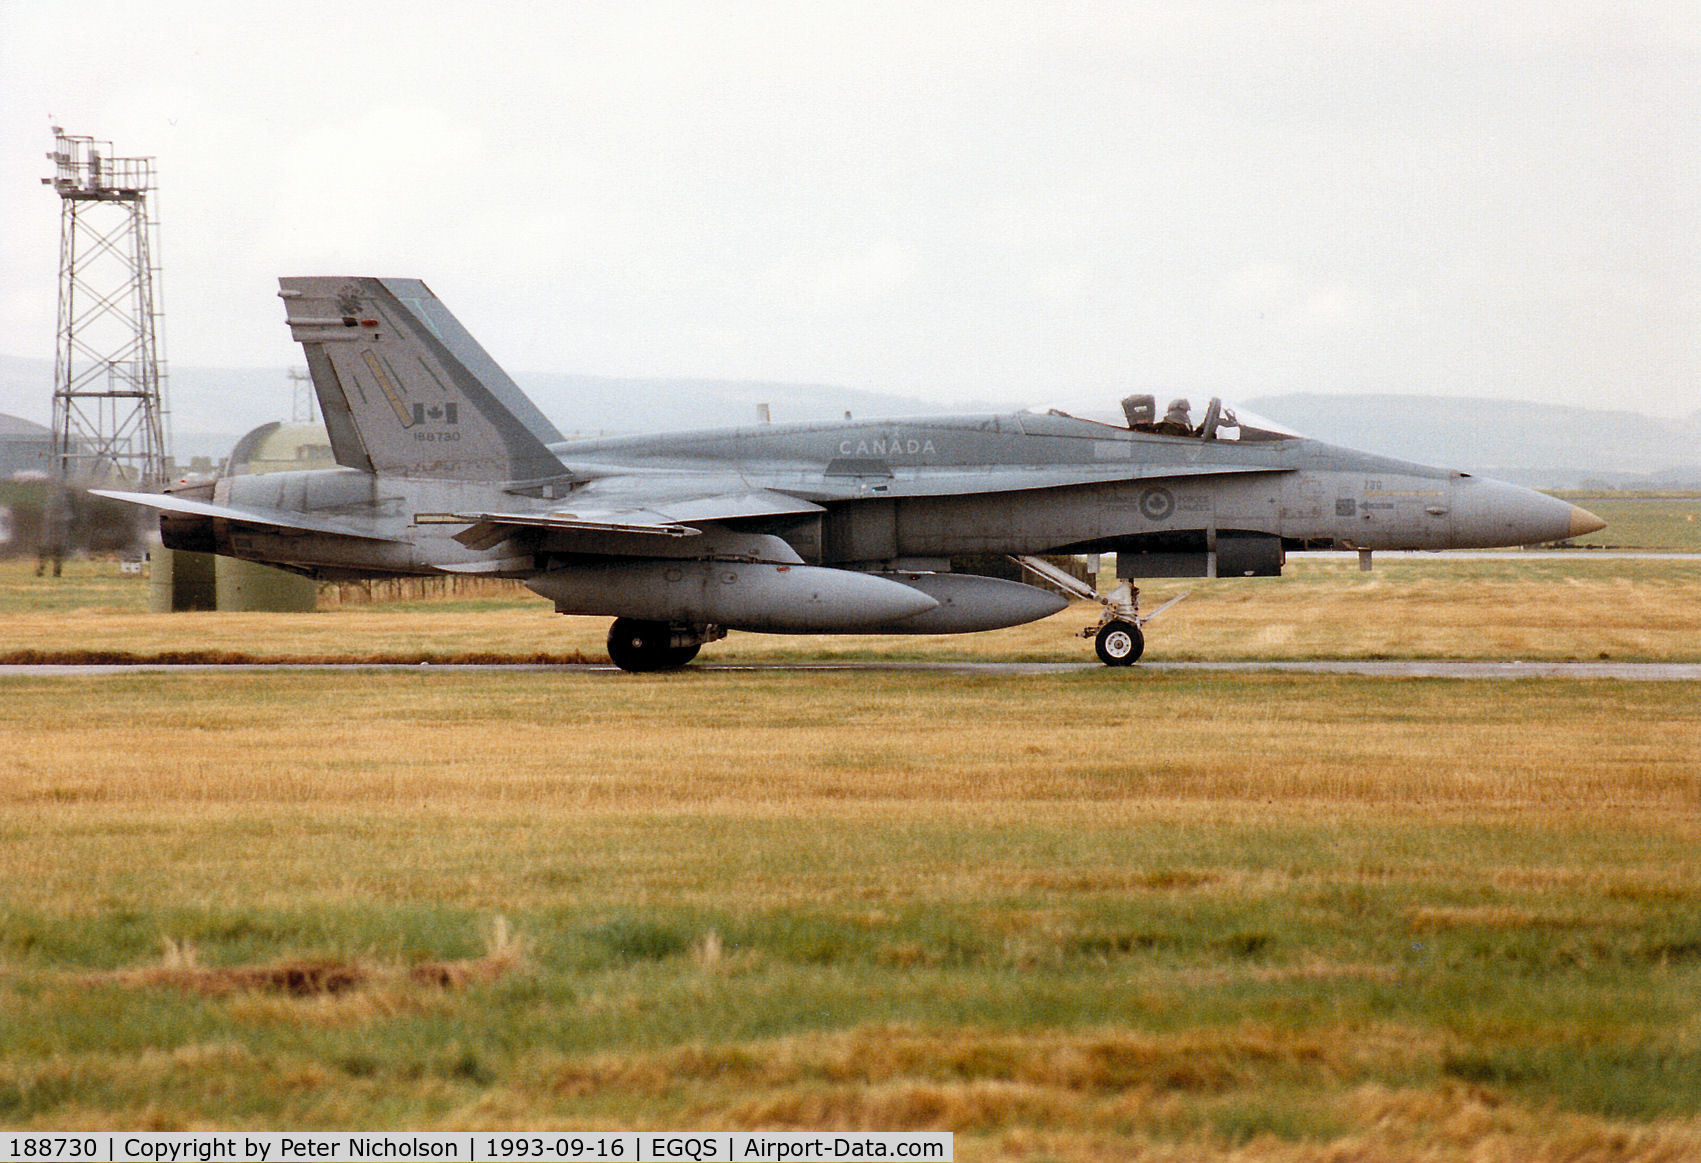 188730, McDonnell Douglas CF-188A Hornet C/N 0232/A184, CF-188A Hornet of 433 Squadron Canadian Armed Forces preparing to depart on an Exercise Solid Stance mission from RAF Lossiemouth in September 1993.